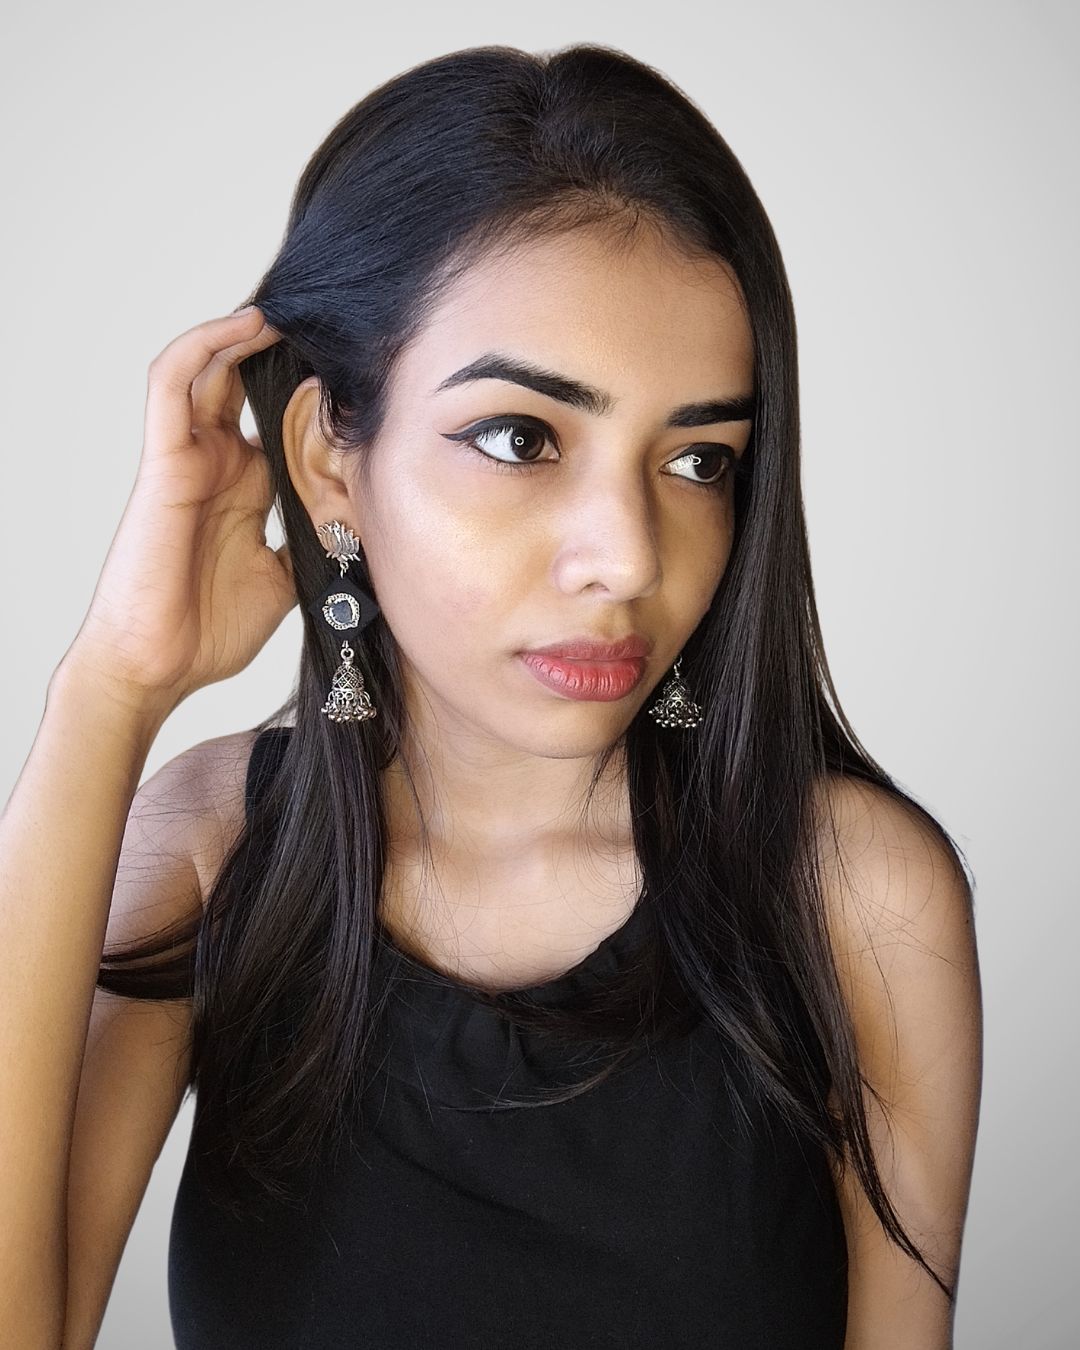 An Indian girl wearing black outfit showing black and silver earrings 